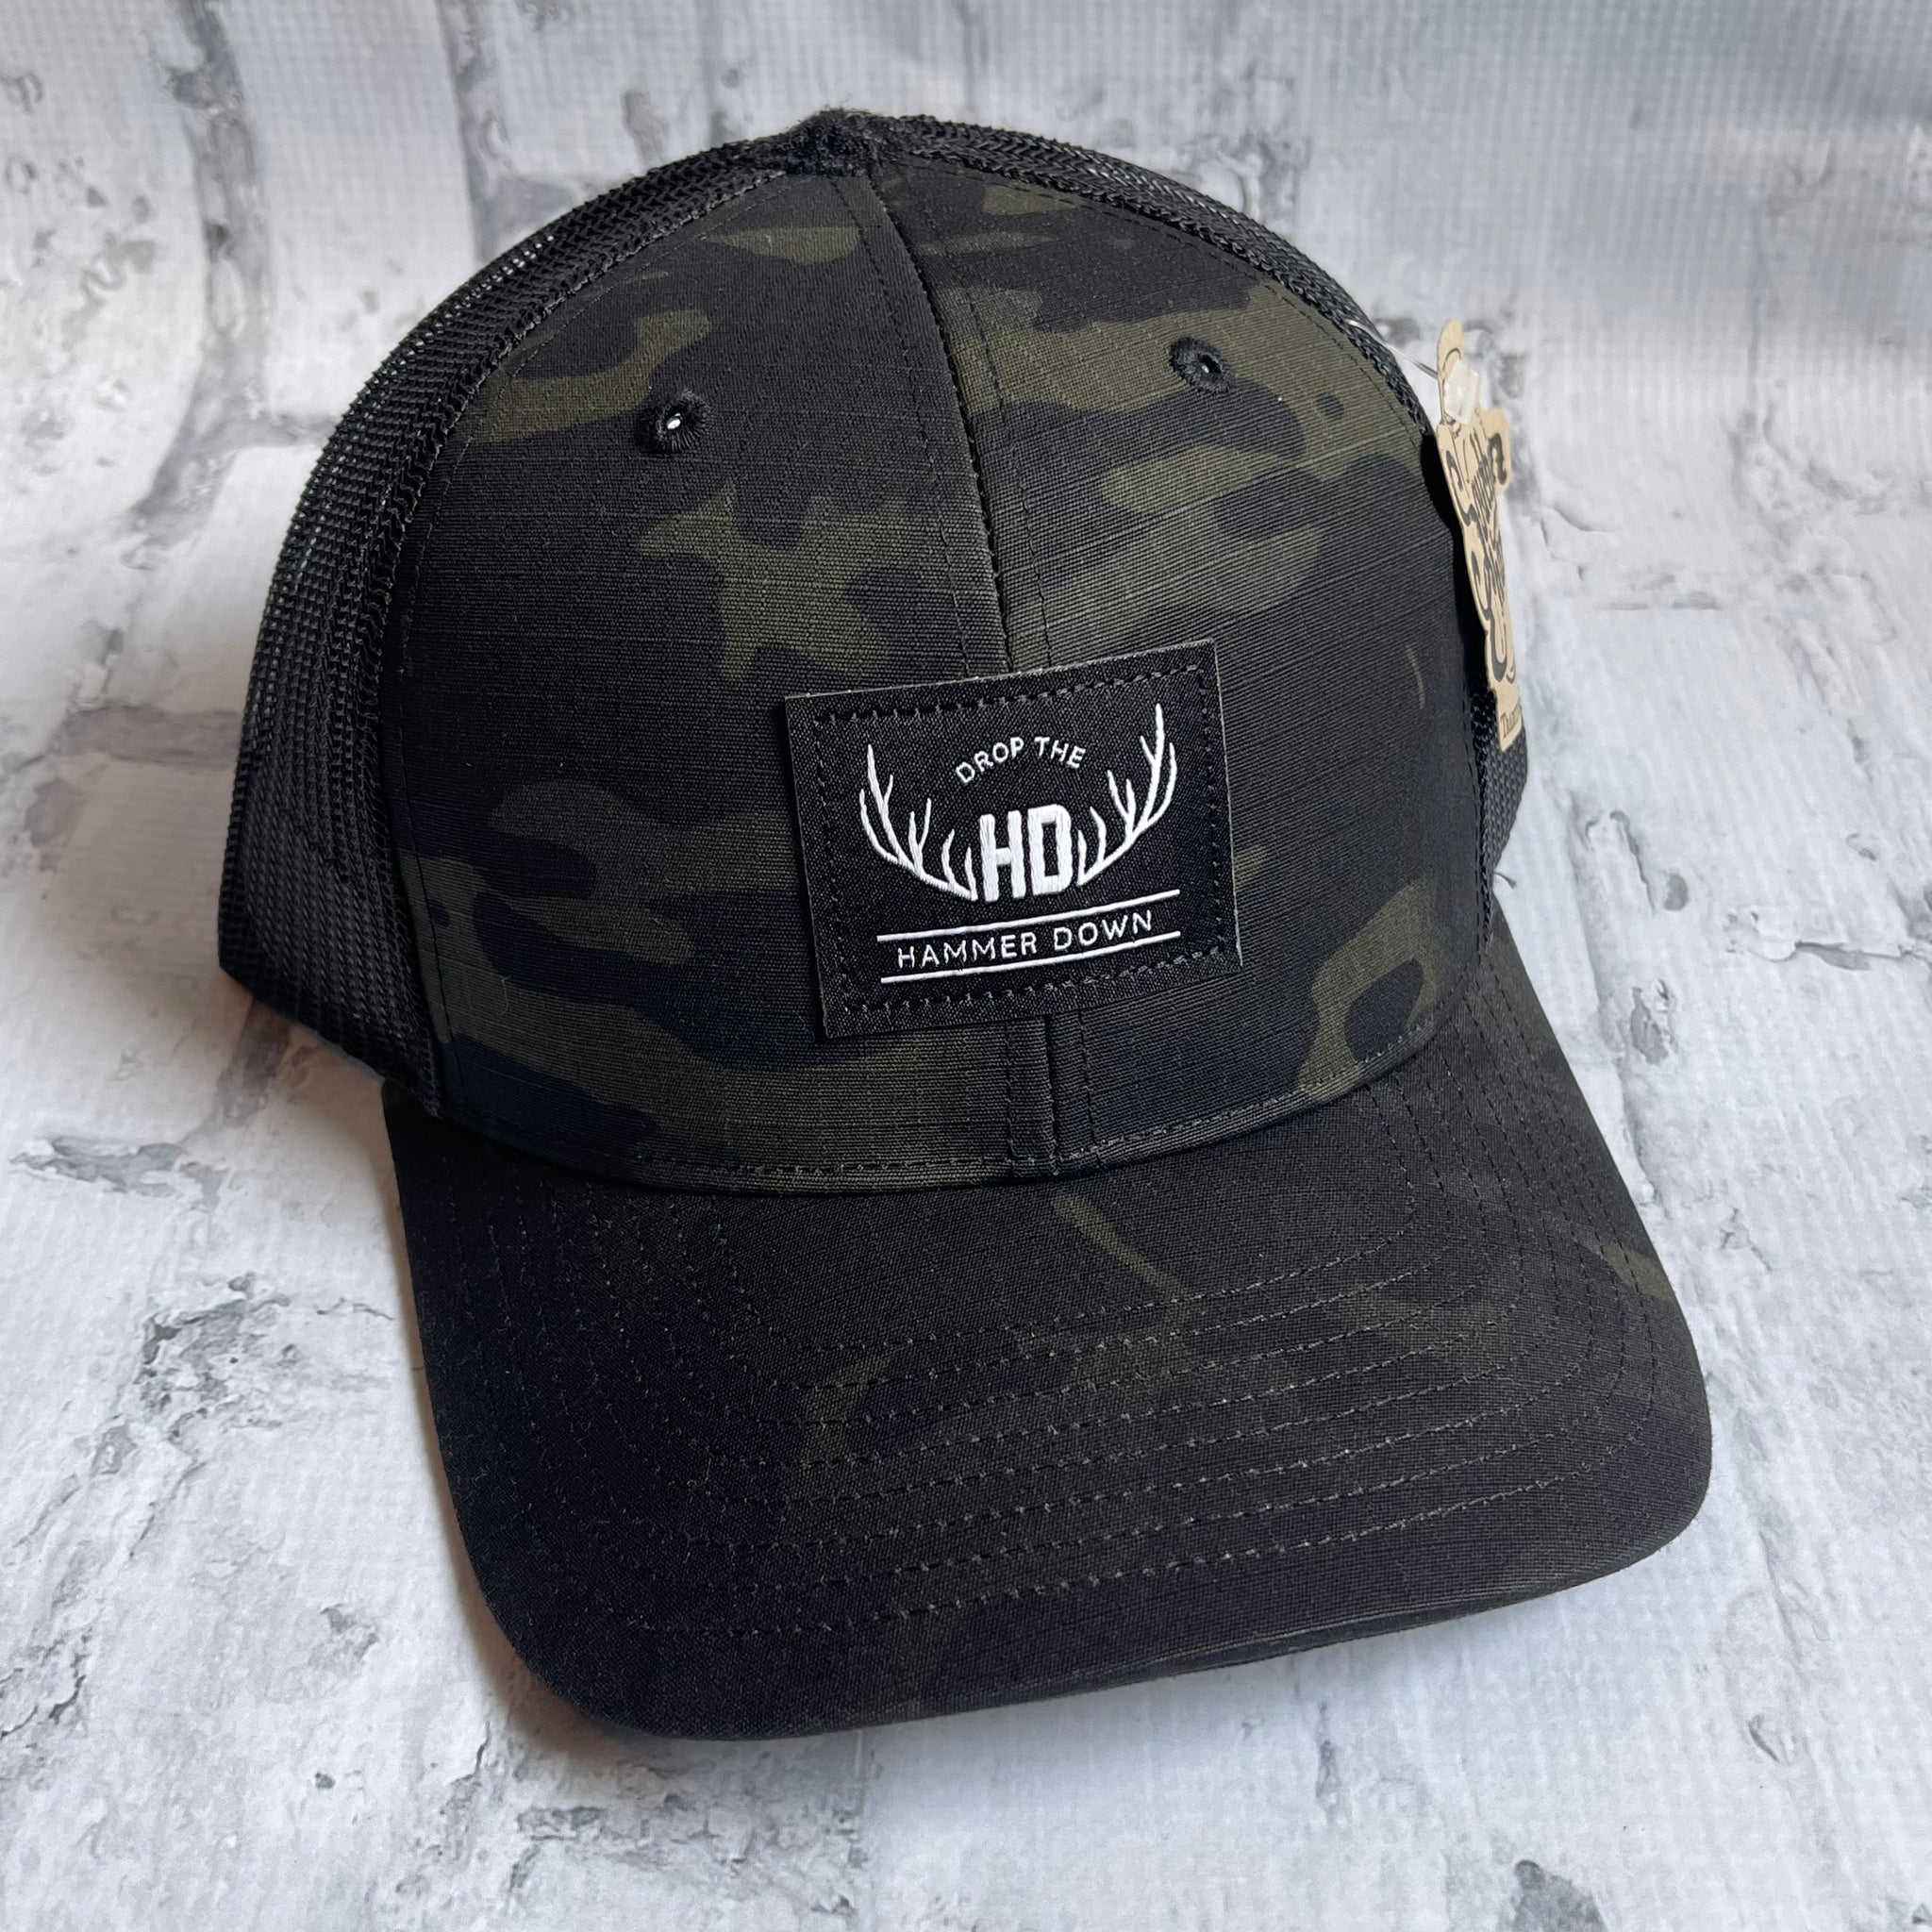 Hammer Down "DTH Antler" Hat - Multicam with Leather Patch - Southern Charm "Shop The Charm"